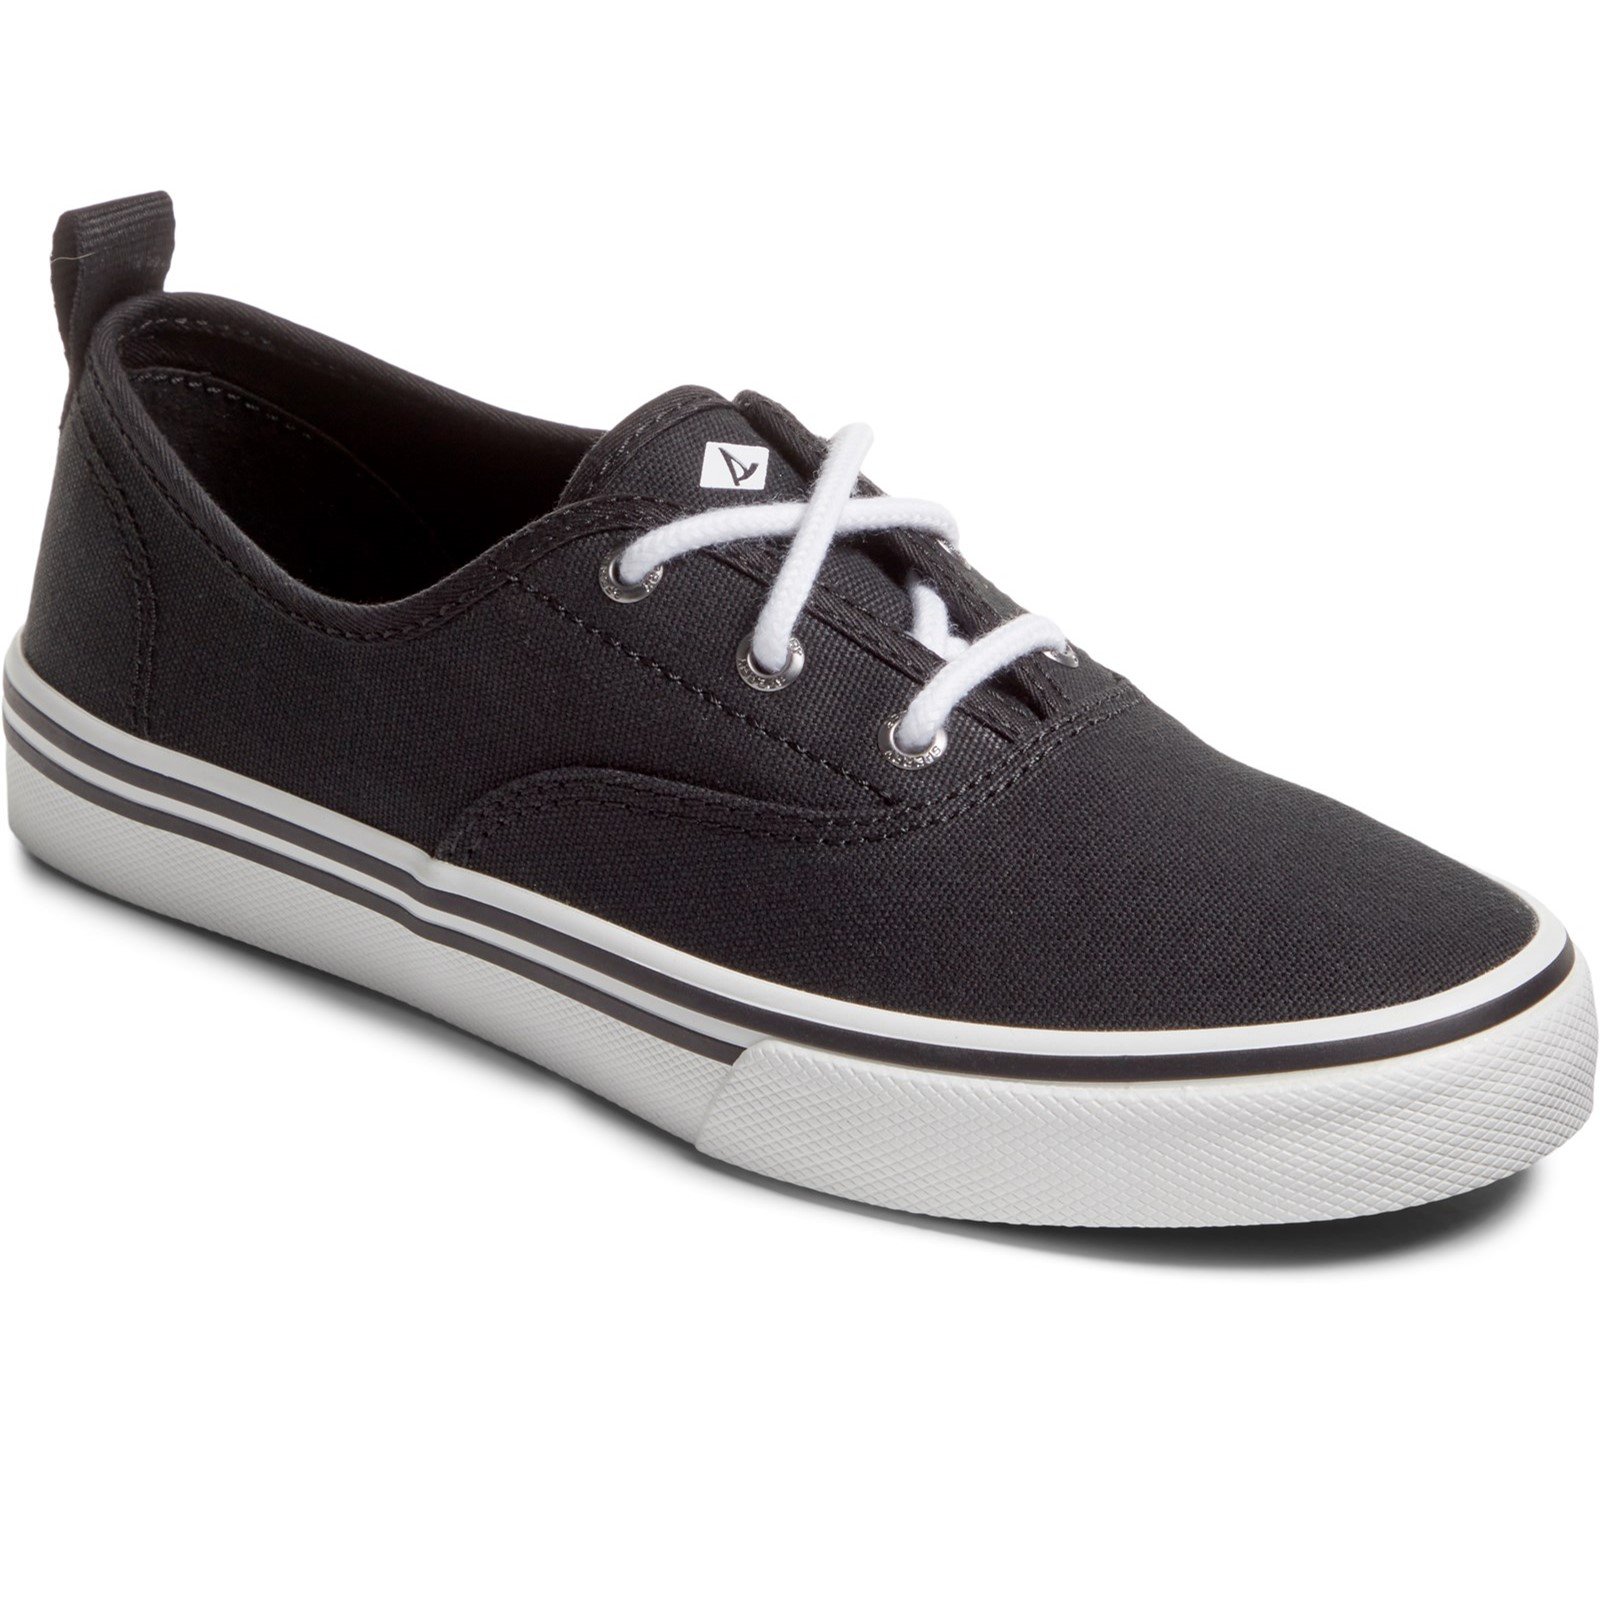 Sperry Women's Crest CVO Trainers Various Colours 32936 - Black 3